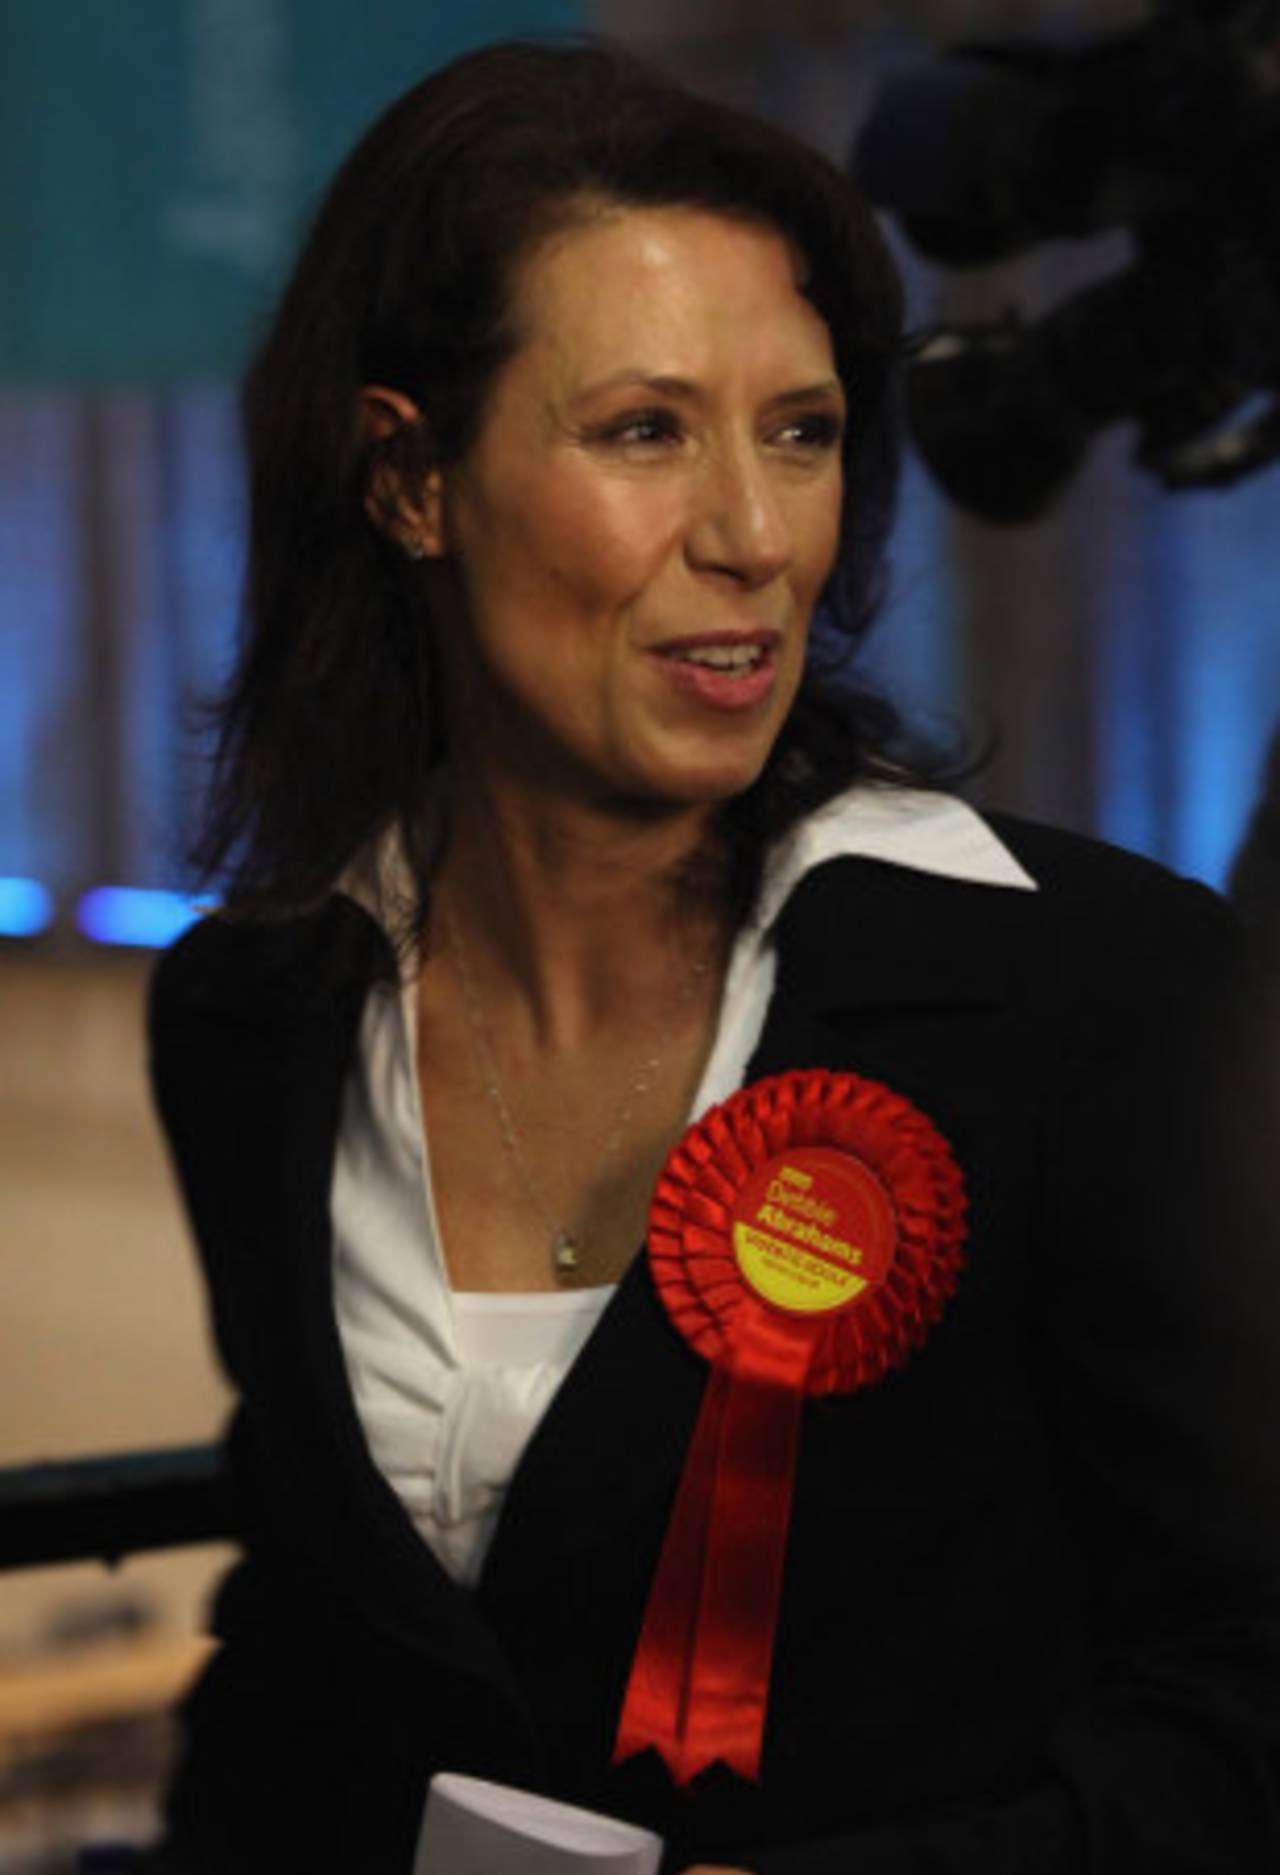 Lily-livered MP Debbie Abrahams decided she’d rather kiss babies than front up to Malinga at The Oval&nbsp;&nbsp;&bull;&nbsp;&nbsp;Getty Images